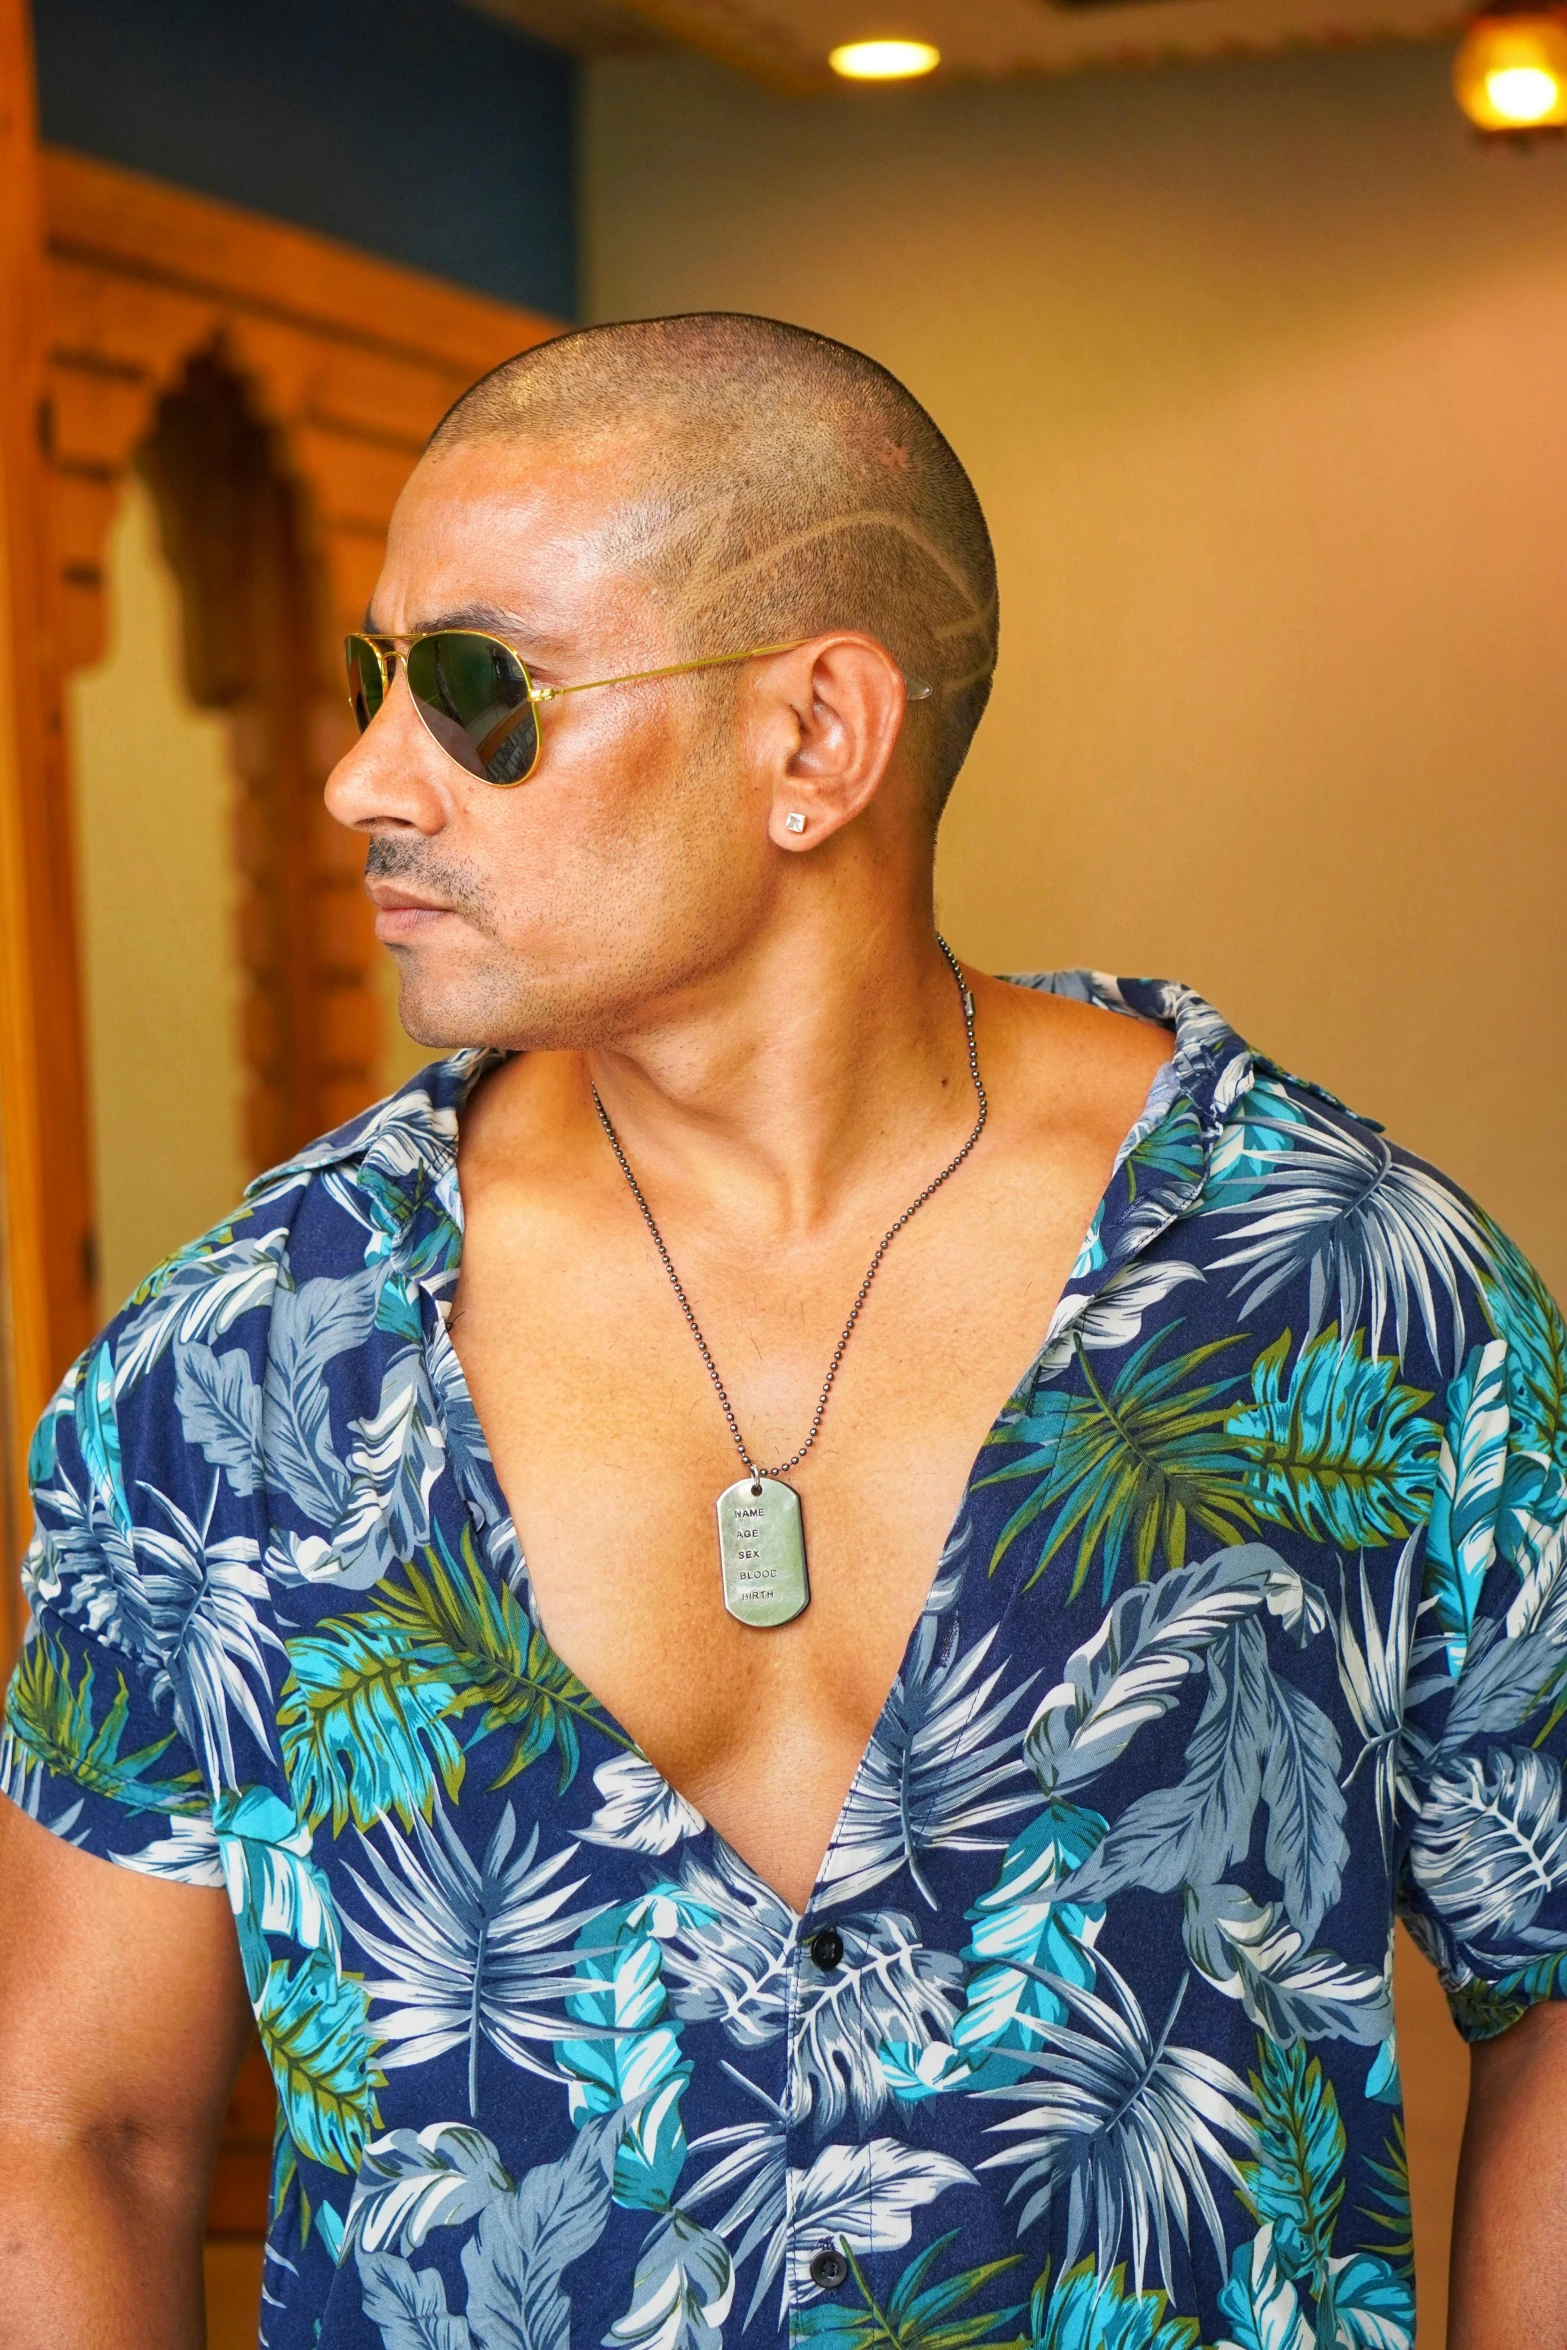 a man with a blue shirt on wearing sunglasses